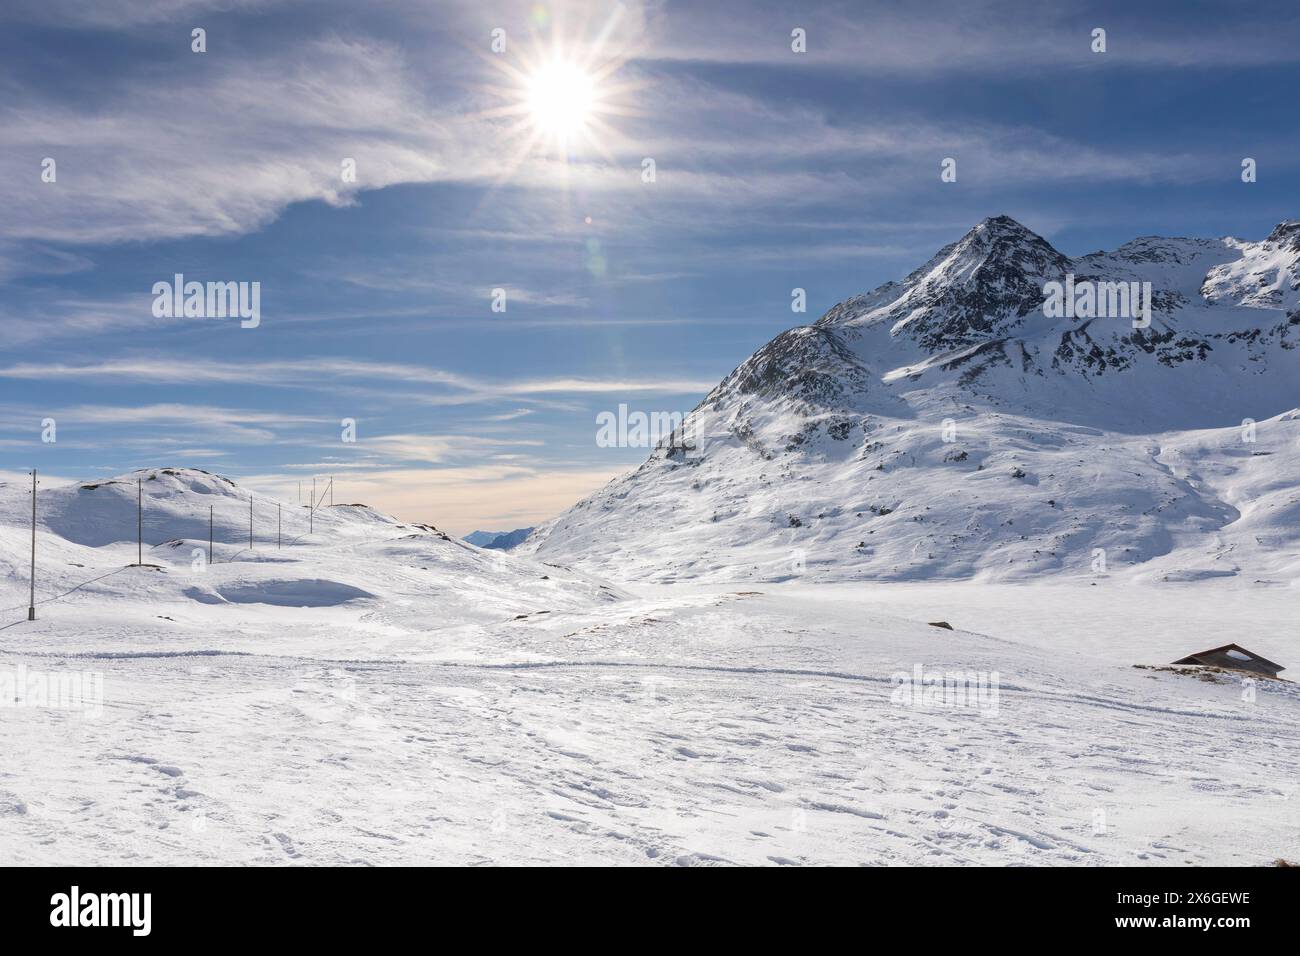 Spectacular landscape of the Bernina Pass in Switzerland on a winter day with lots of sunshine. All the mountains are covered with a lot of snow. Nobo Stock Photo